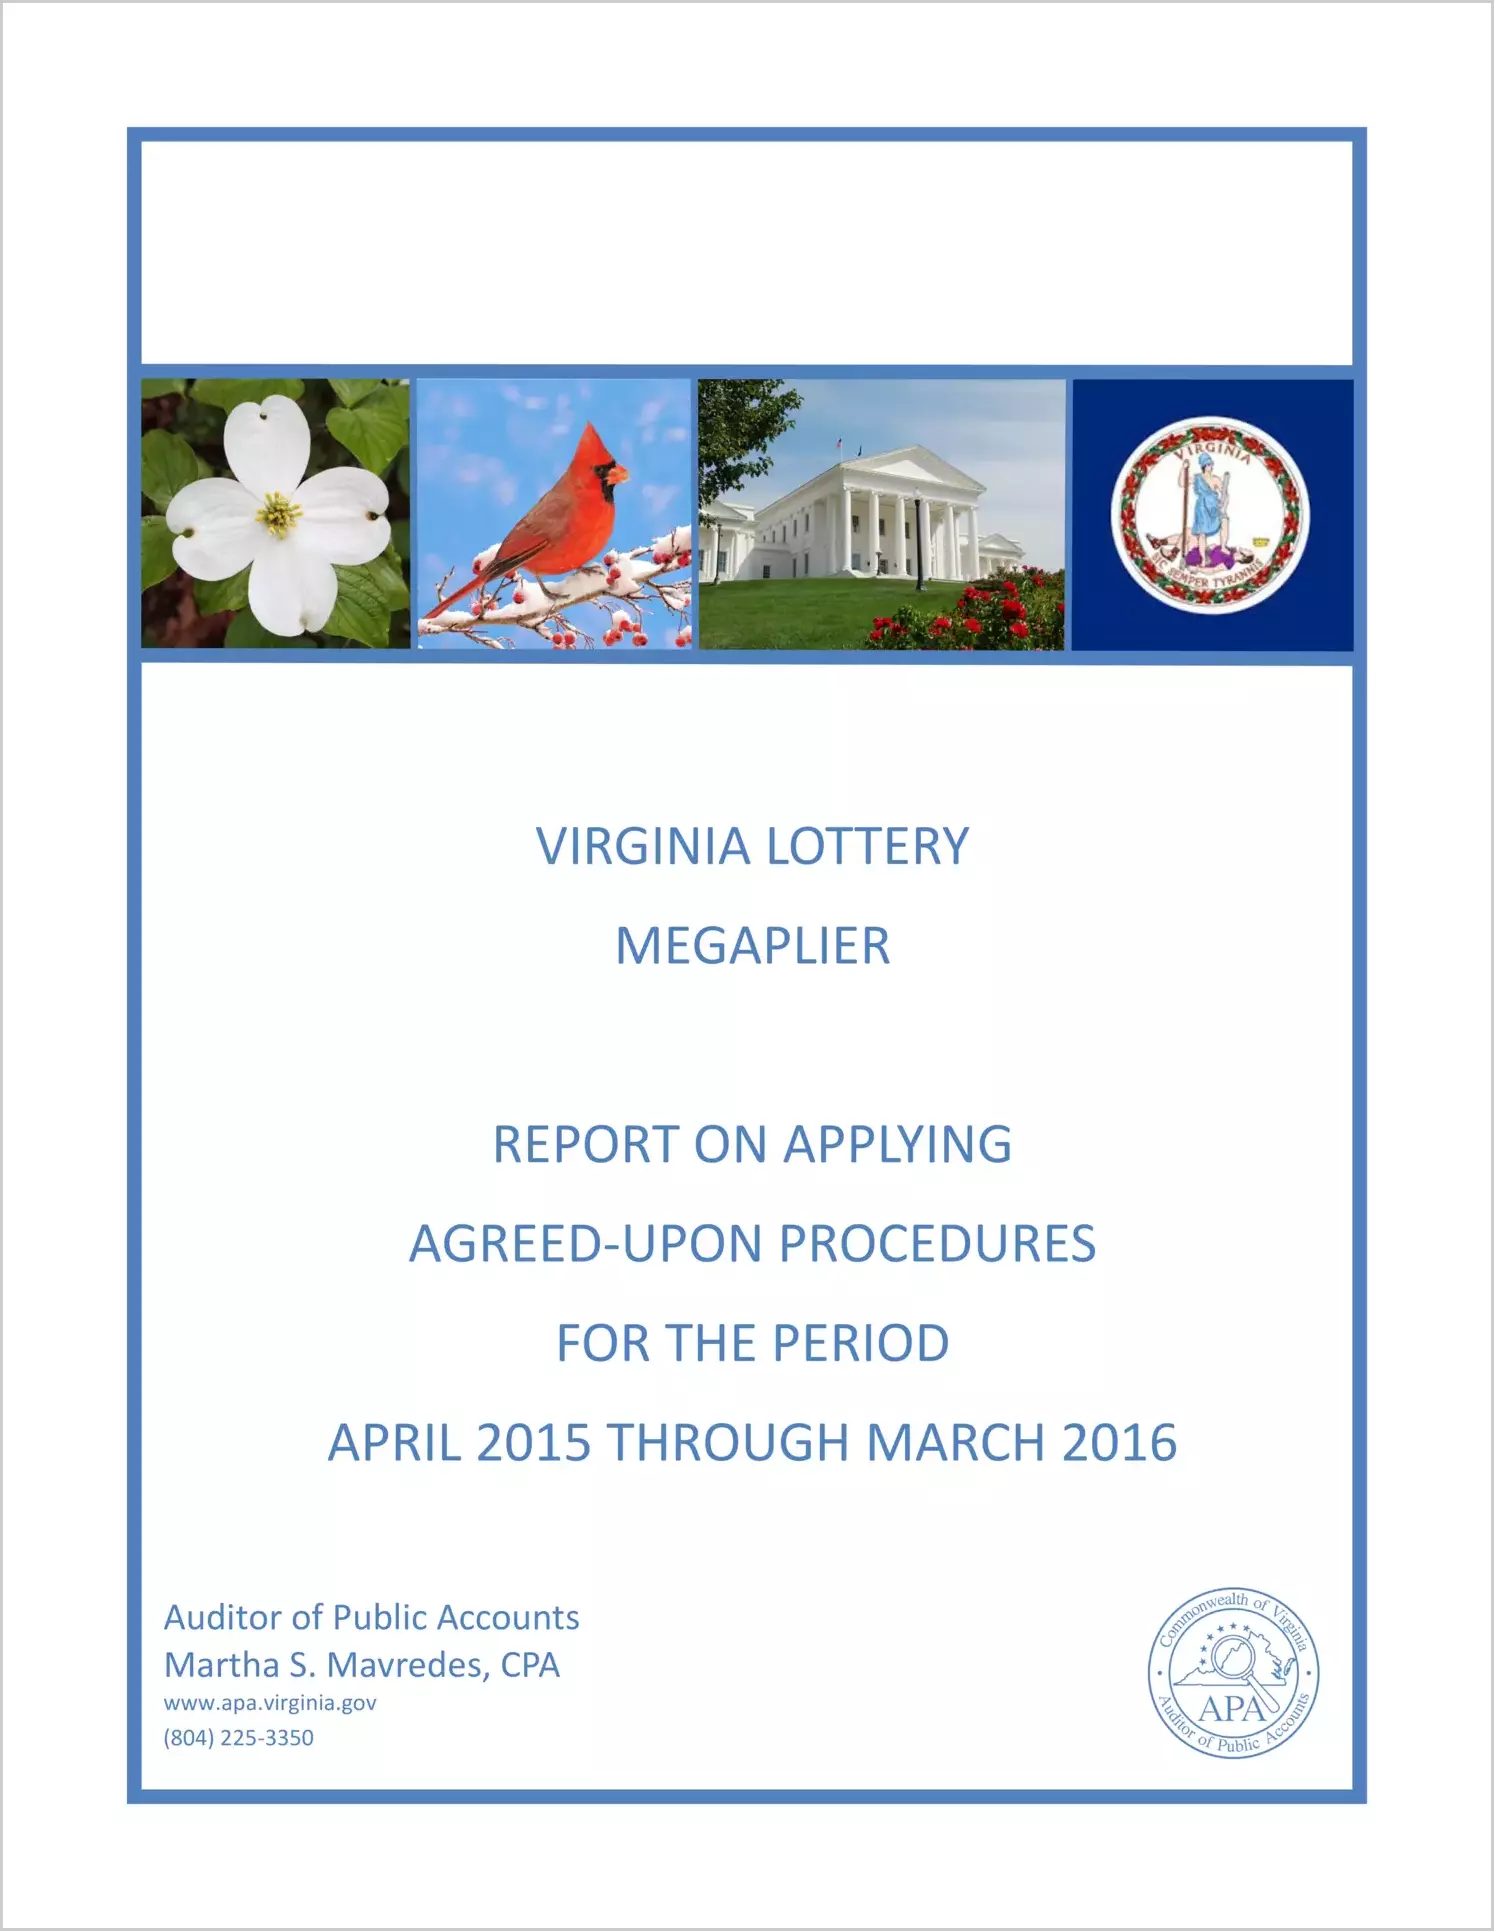 VA Lottery Megaplier report on Applying Agreed-Upon Procedures for the period April, 2015 through March, 2016